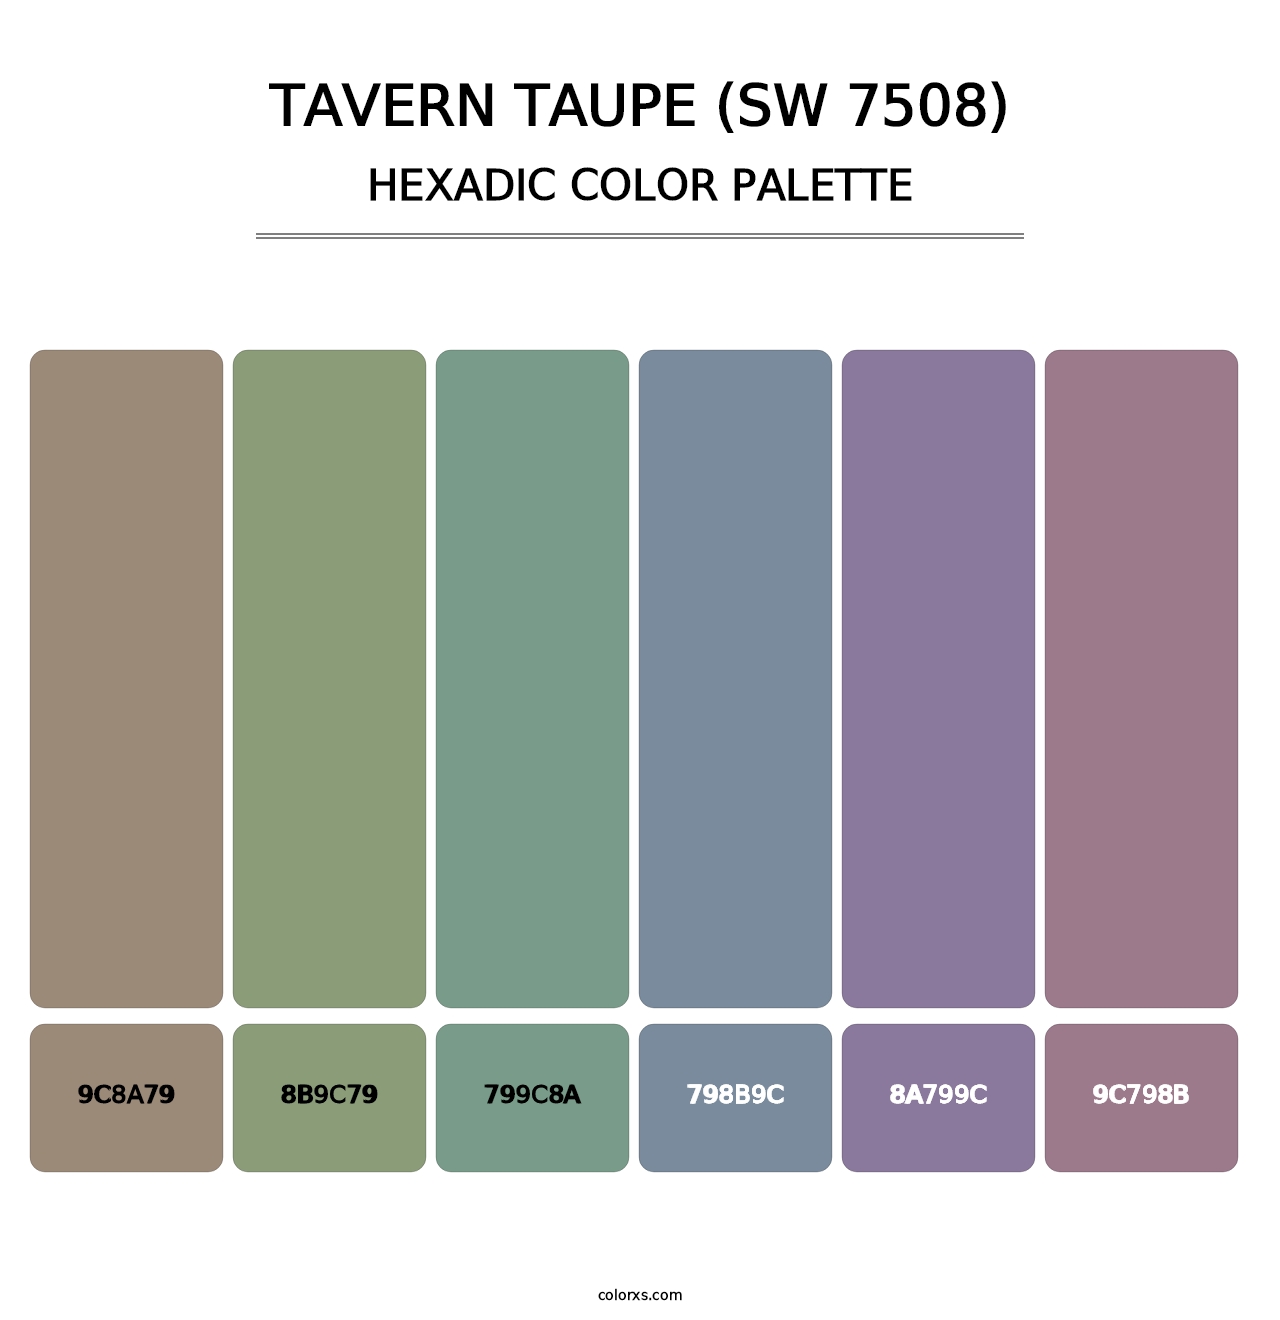 Tavern Taupe (SW 7508) - Hexadic Color Palette